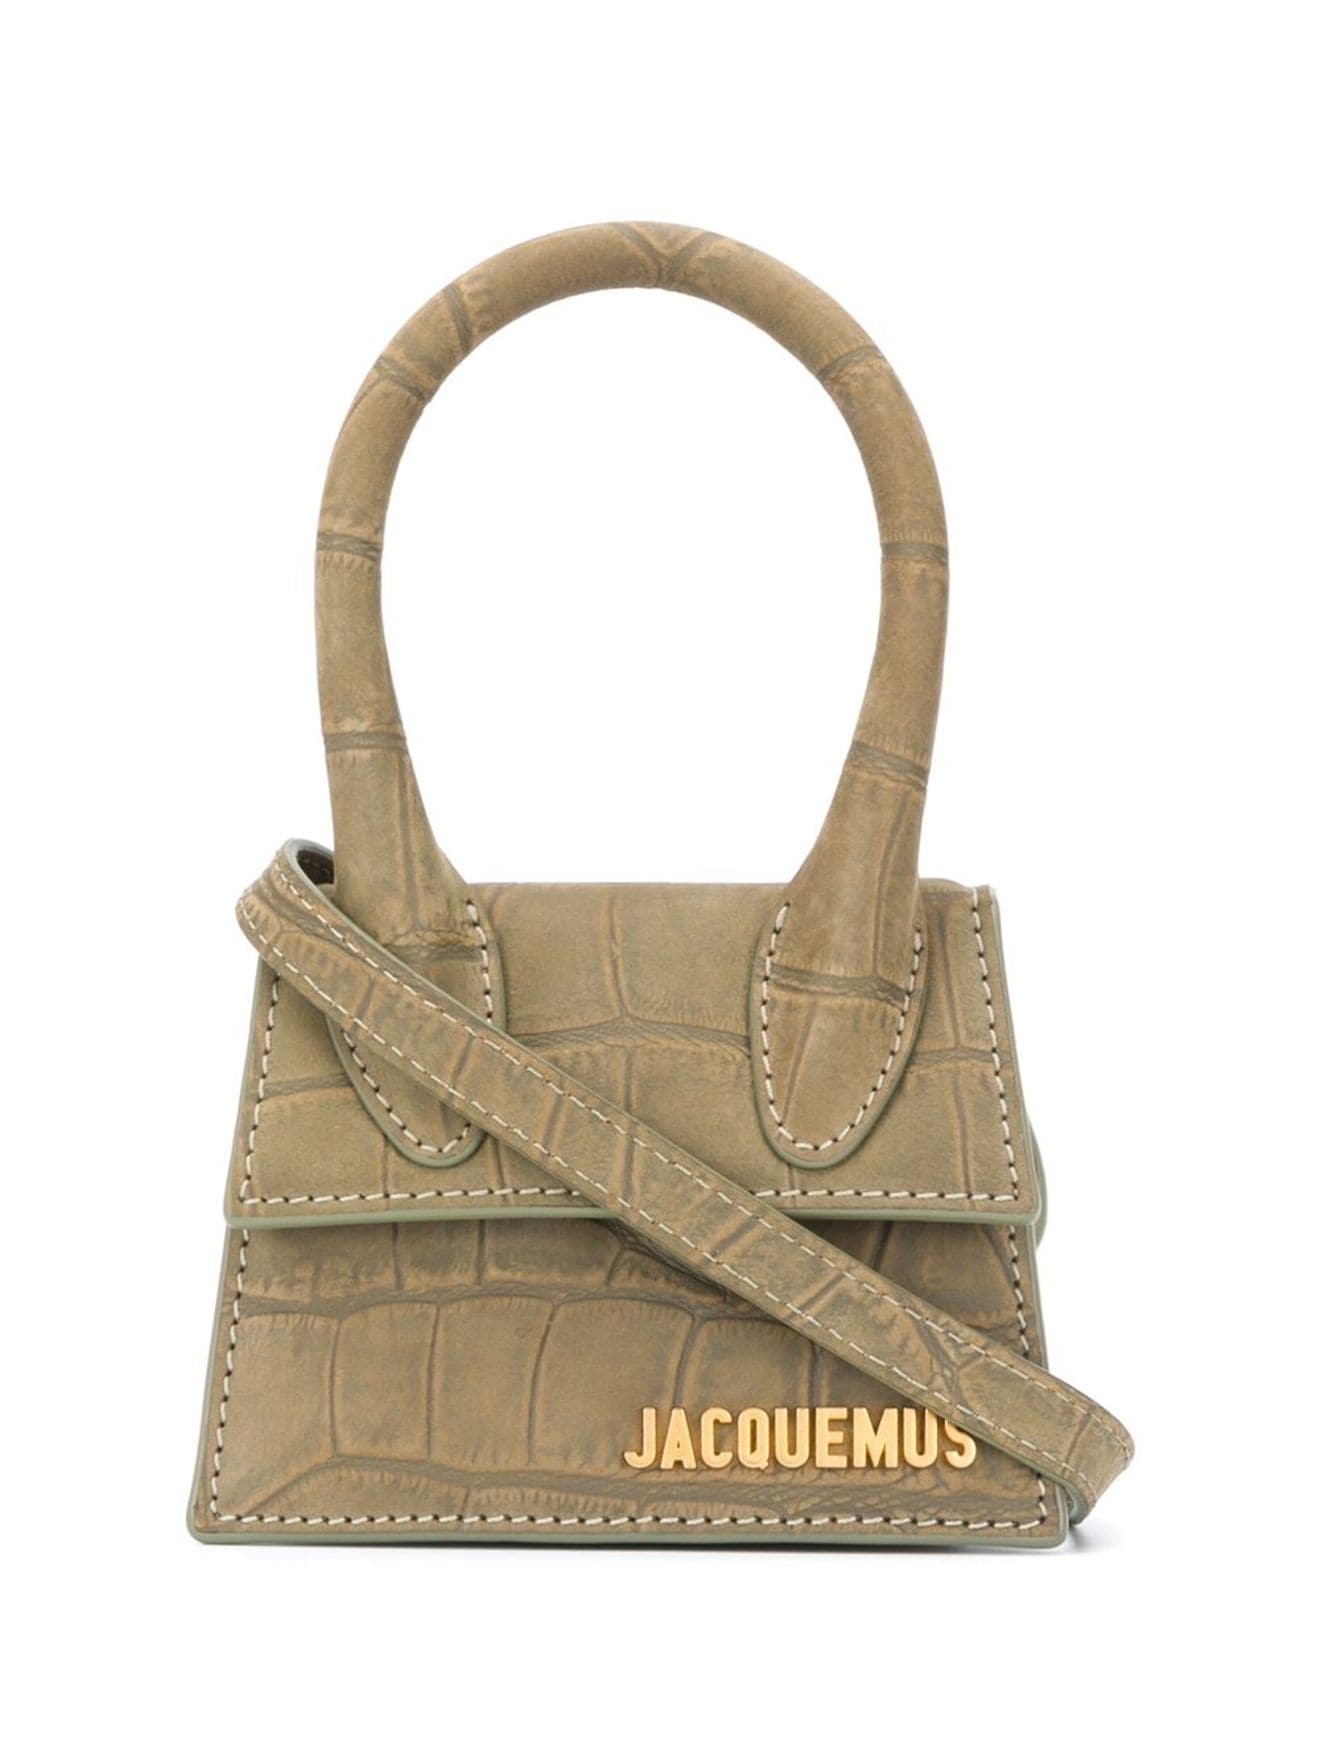 Jacquemus Le Chiquito tote bag green | MODES